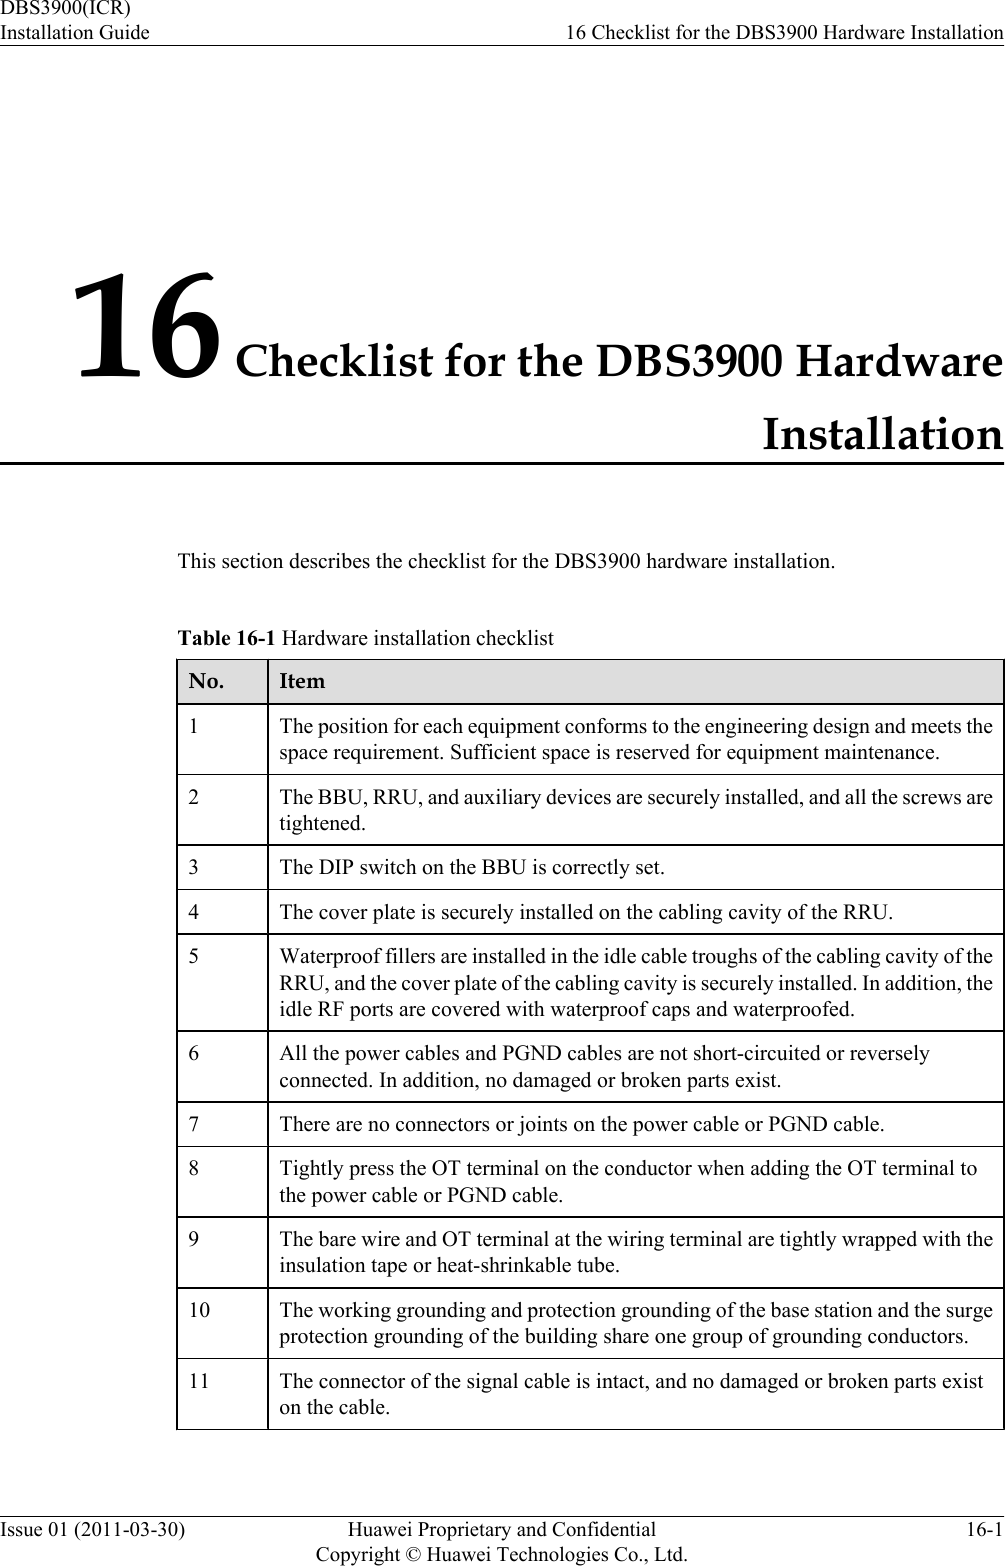 16 Checklist for the DBS3900 HardwareInstallationThis section describes the checklist for the DBS3900 hardware installation.Table 16-1 Hardware installation checklistNo. Item1The position for each equipment conforms to the engineering design and meets thespace requirement. Sufficient space is reserved for equipment maintenance.2 The BBU, RRU, and auxiliary devices are securely installed, and all the screws aretightened.3 The DIP switch on the BBU is correctly set.4 The cover plate is securely installed on the cabling cavity of the RRU.5 Waterproof fillers are installed in the idle cable troughs of the cabling cavity of theRRU, and the cover plate of the cabling cavity is securely installed. In addition, theidle RF ports are covered with waterproof caps and waterproofed.6 All the power cables and PGND cables are not short-circuited or reverselyconnected. In addition, no damaged or broken parts exist.7 There are no connectors or joints on the power cable or PGND cable.8 Tightly press the OT terminal on the conductor when adding the OT terminal tothe power cable or PGND cable.9 The bare wire and OT terminal at the wiring terminal are tightly wrapped with theinsulation tape or heat-shrinkable tube.10 The working grounding and protection grounding of the base station and the surgeprotection grounding of the building share one group of grounding conductors.11 The connector of the signal cable is intact, and no damaged or broken parts existon the cable.DBS3900(ICR)Installation Guide 16 Checklist for the DBS3900 Hardware InstallationIssue 01 (2011-03-30) Huawei Proprietary and ConfidentialCopyright © Huawei Technologies Co., Ltd.16-1